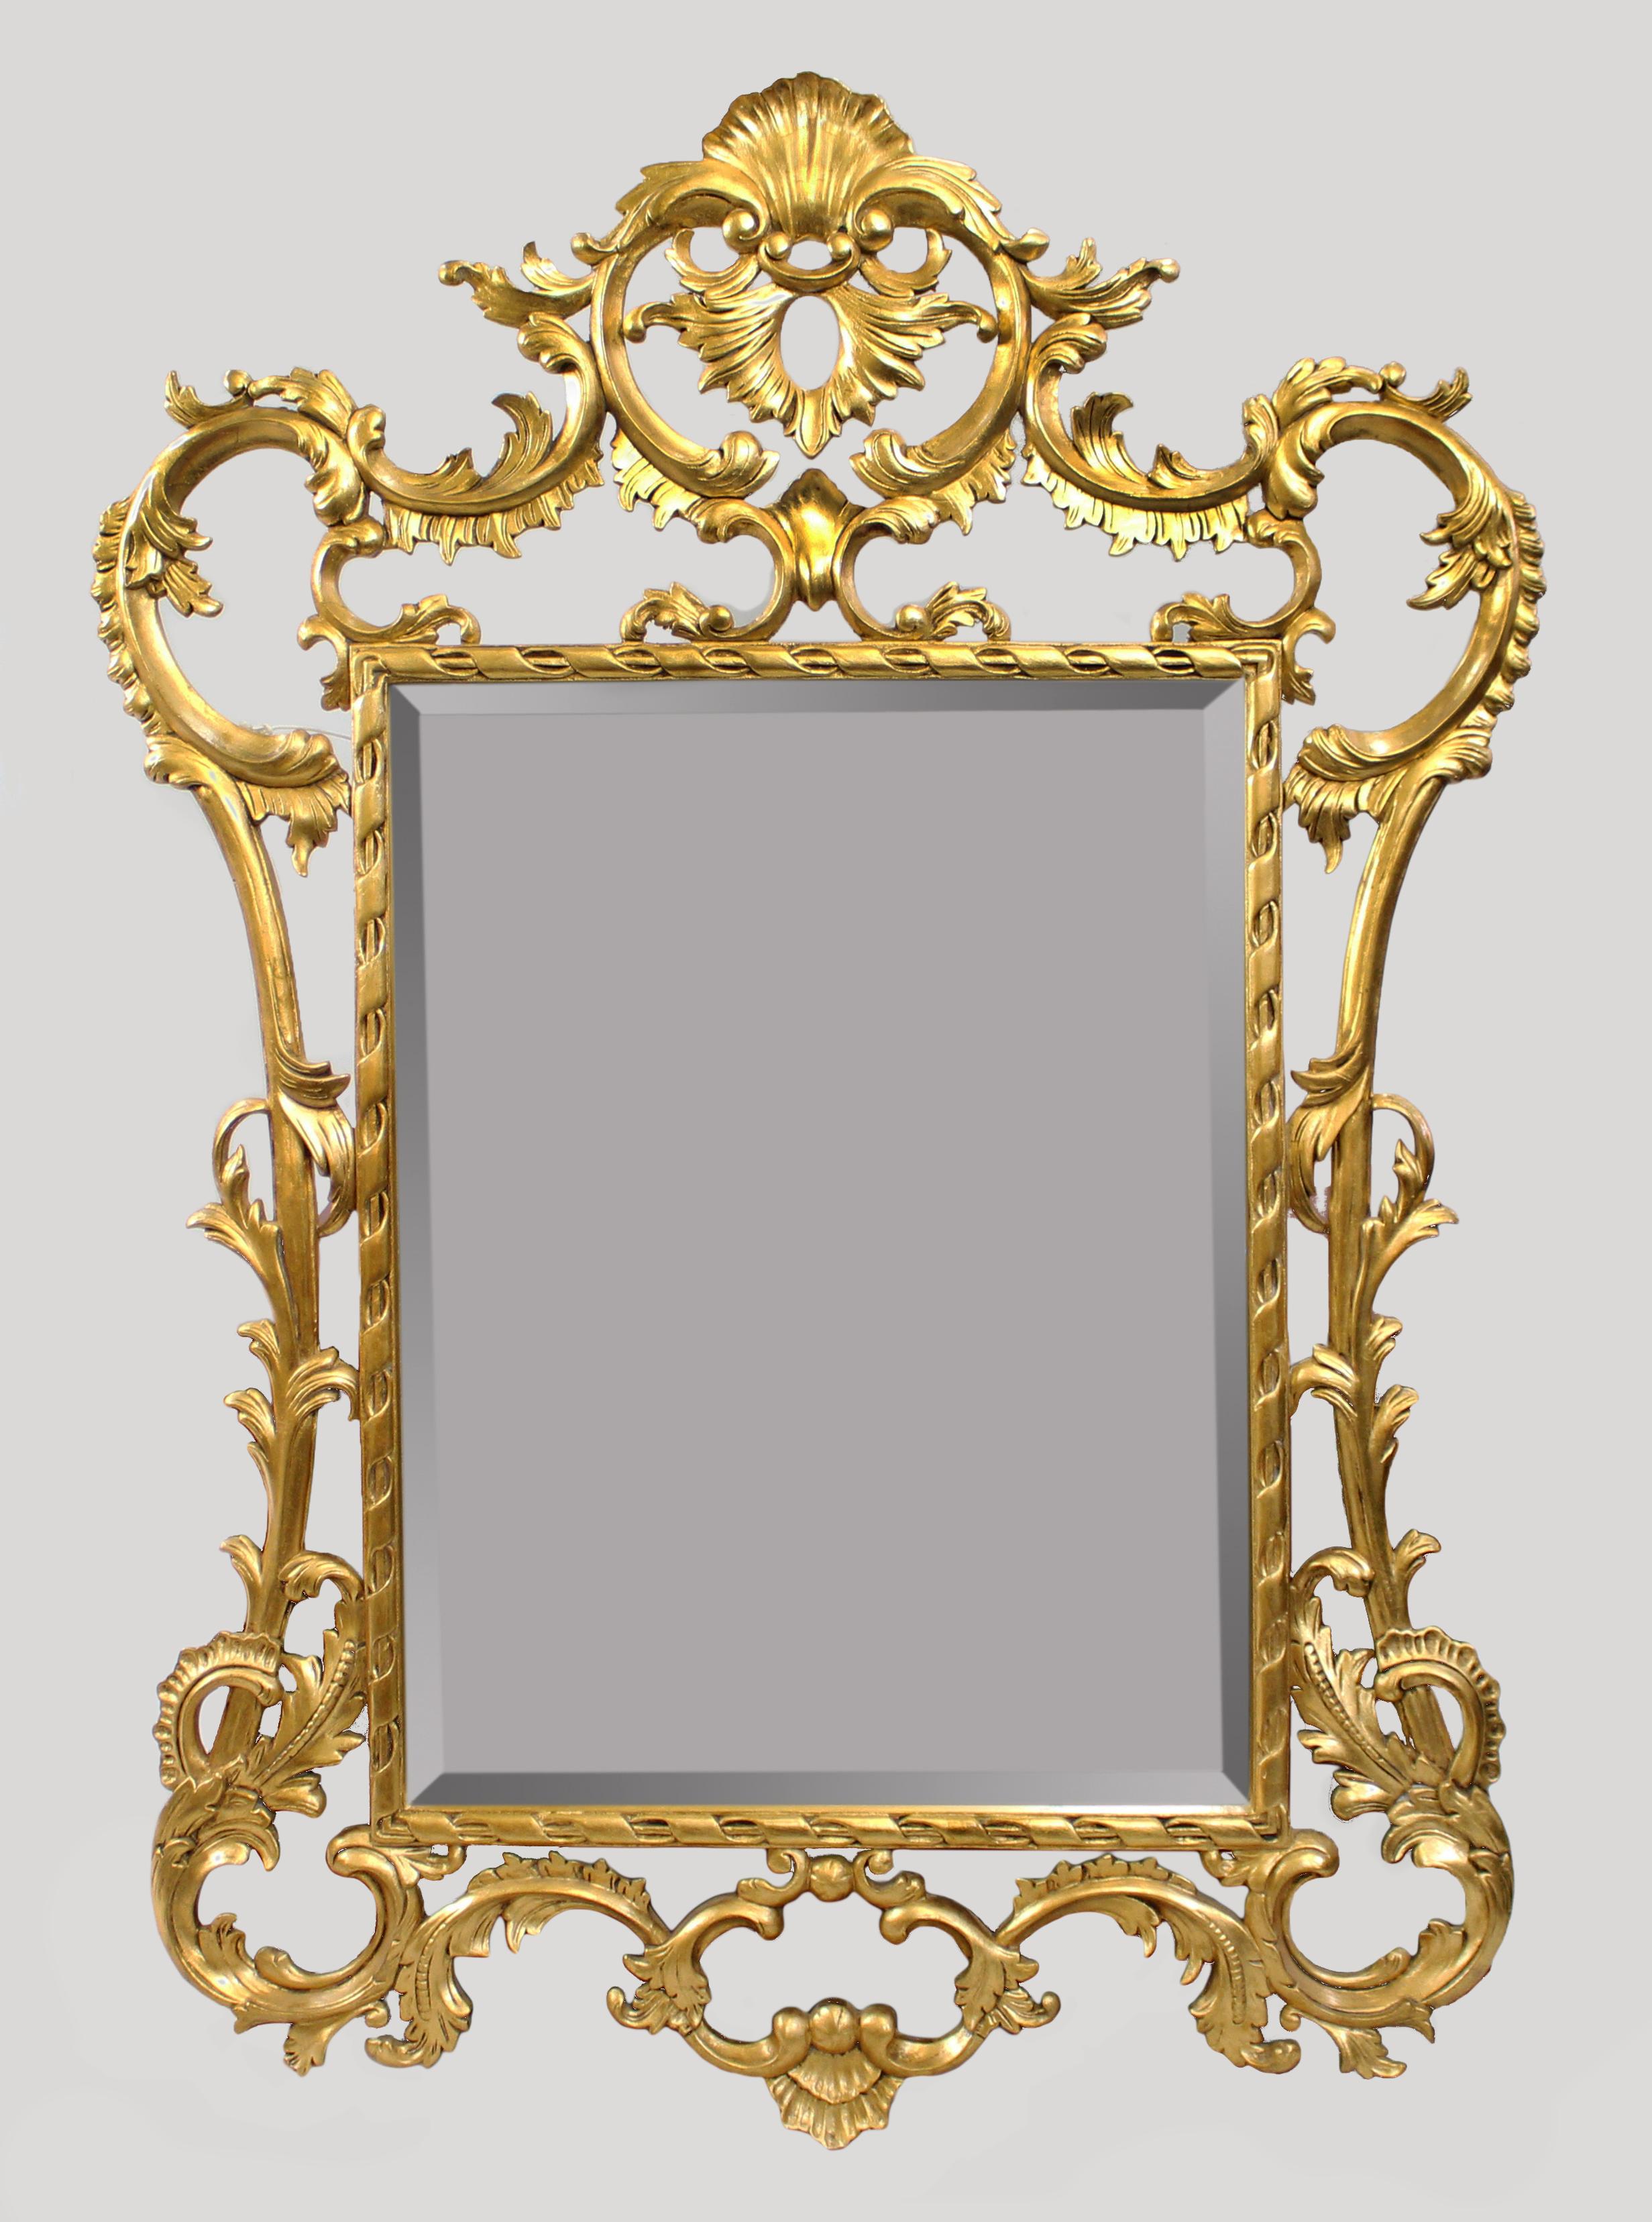 Ornately hand carved giltwood bevelled glass mirror


Measures: Width 92 cm 3 ft

Height 130 cm 4 ft 3 in.
 

Period Late 20th c.

Description Ornate finely hand carved wood frame with true gold leaf finish. Bevelled glass